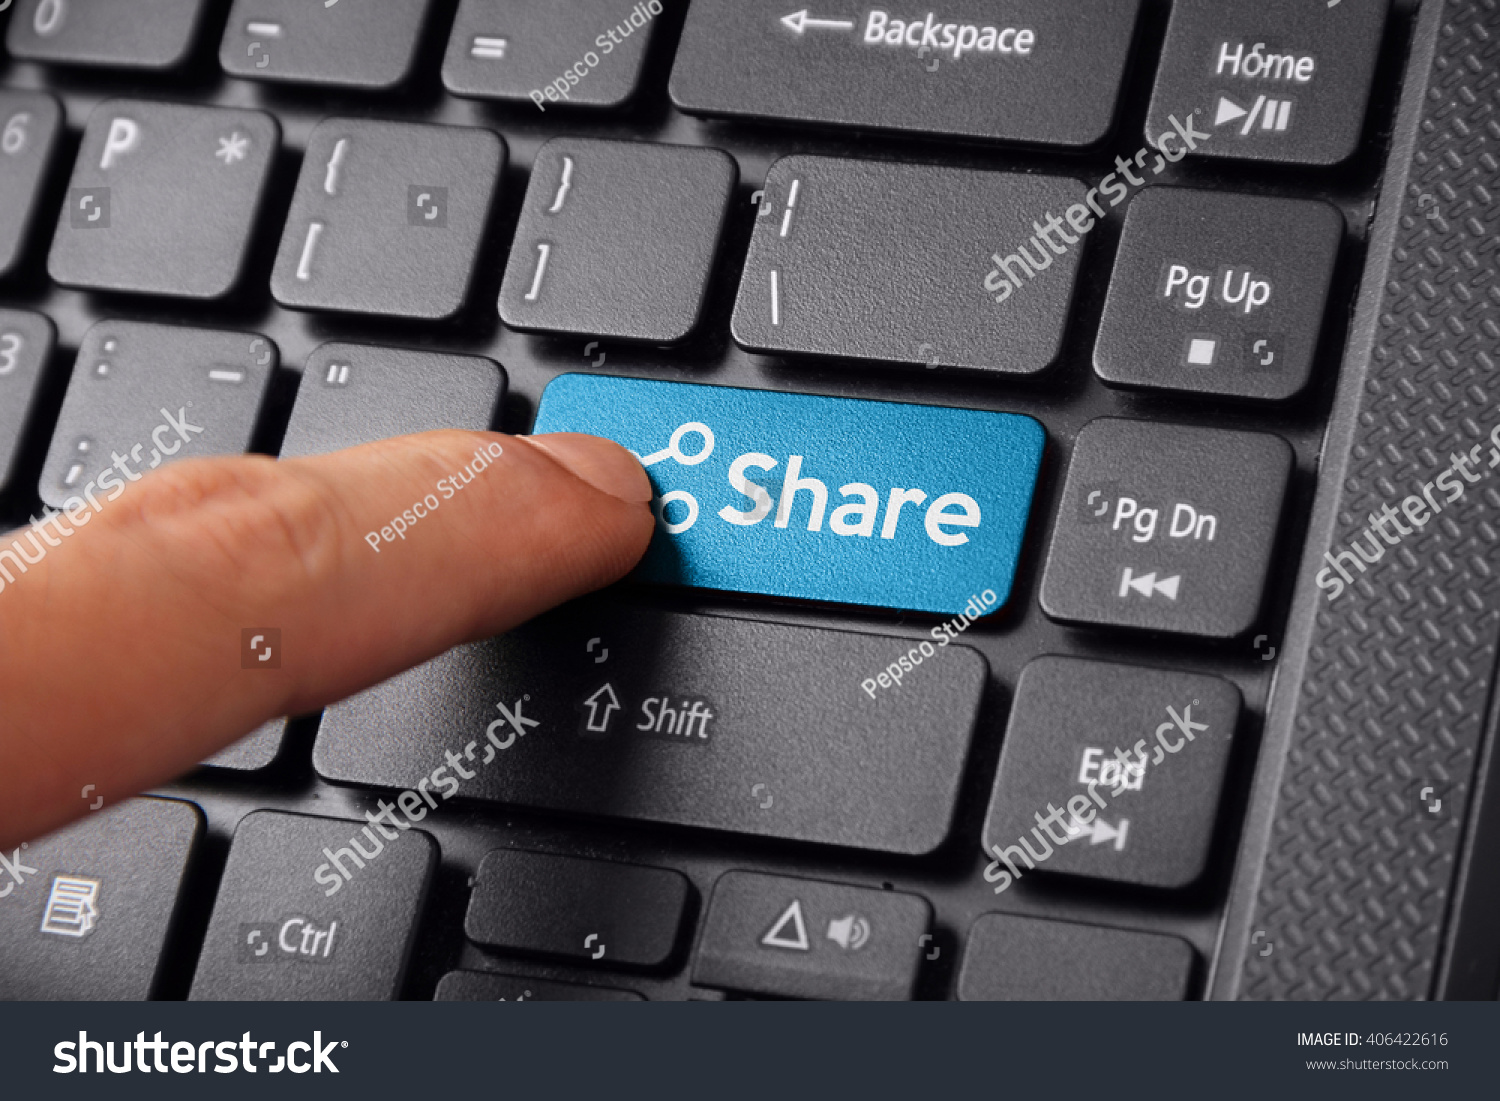 Close up shot of a finger clicking the SHARE button on a laptop keyboard #406422616